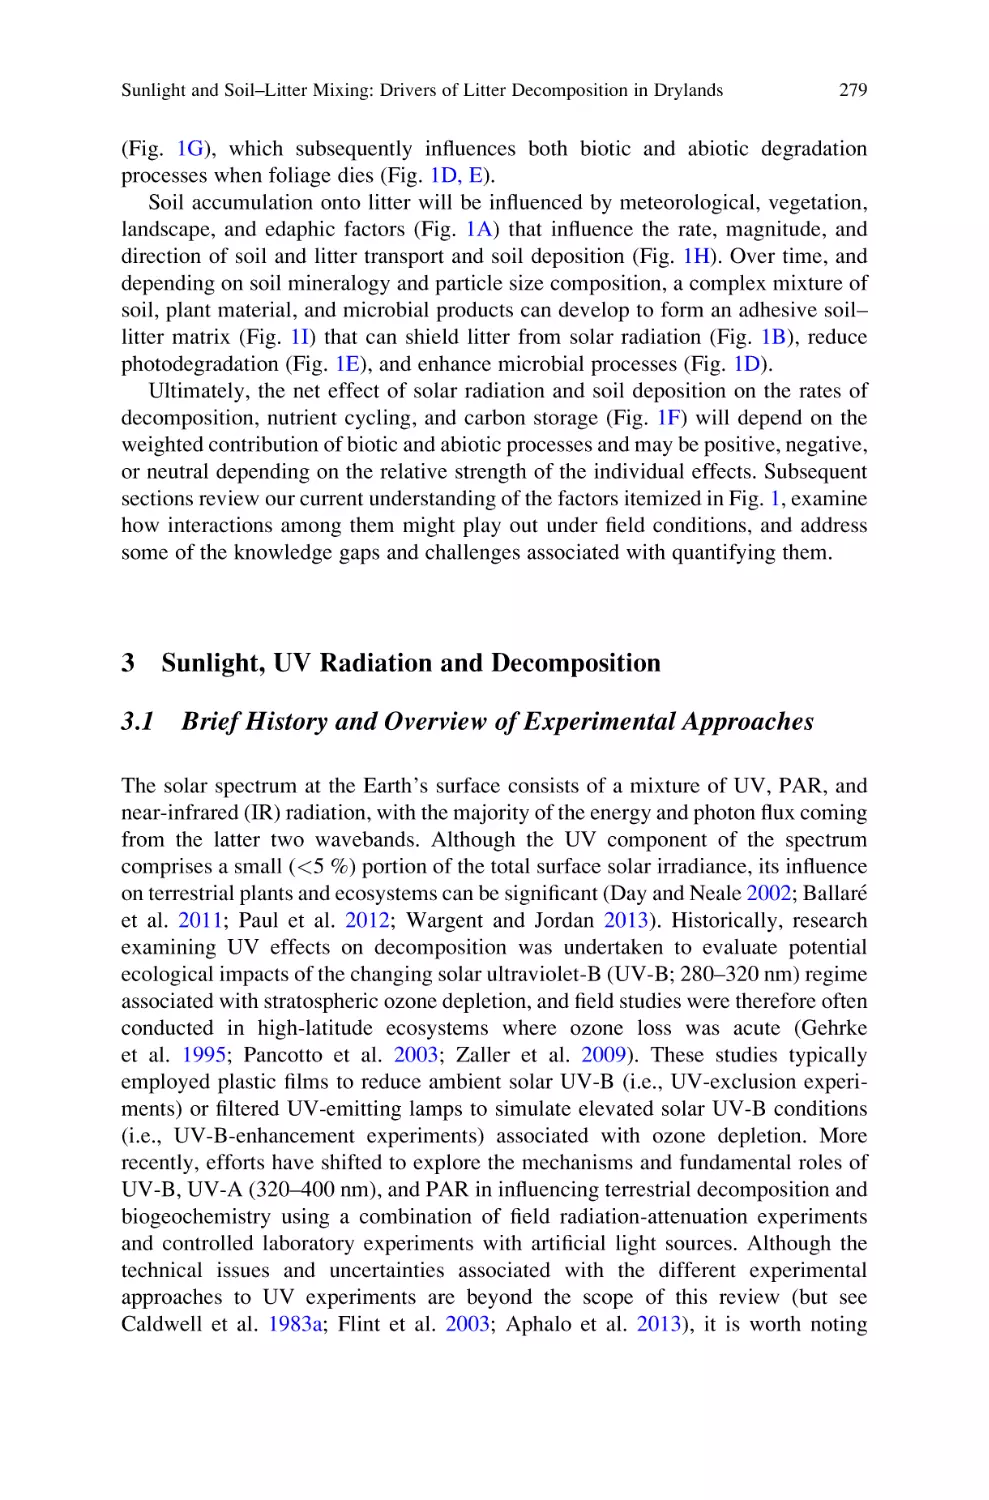 3 Sunlight, UV Radiation and Decomposition
3.1 Brief History and Overview of Experimental Approaches